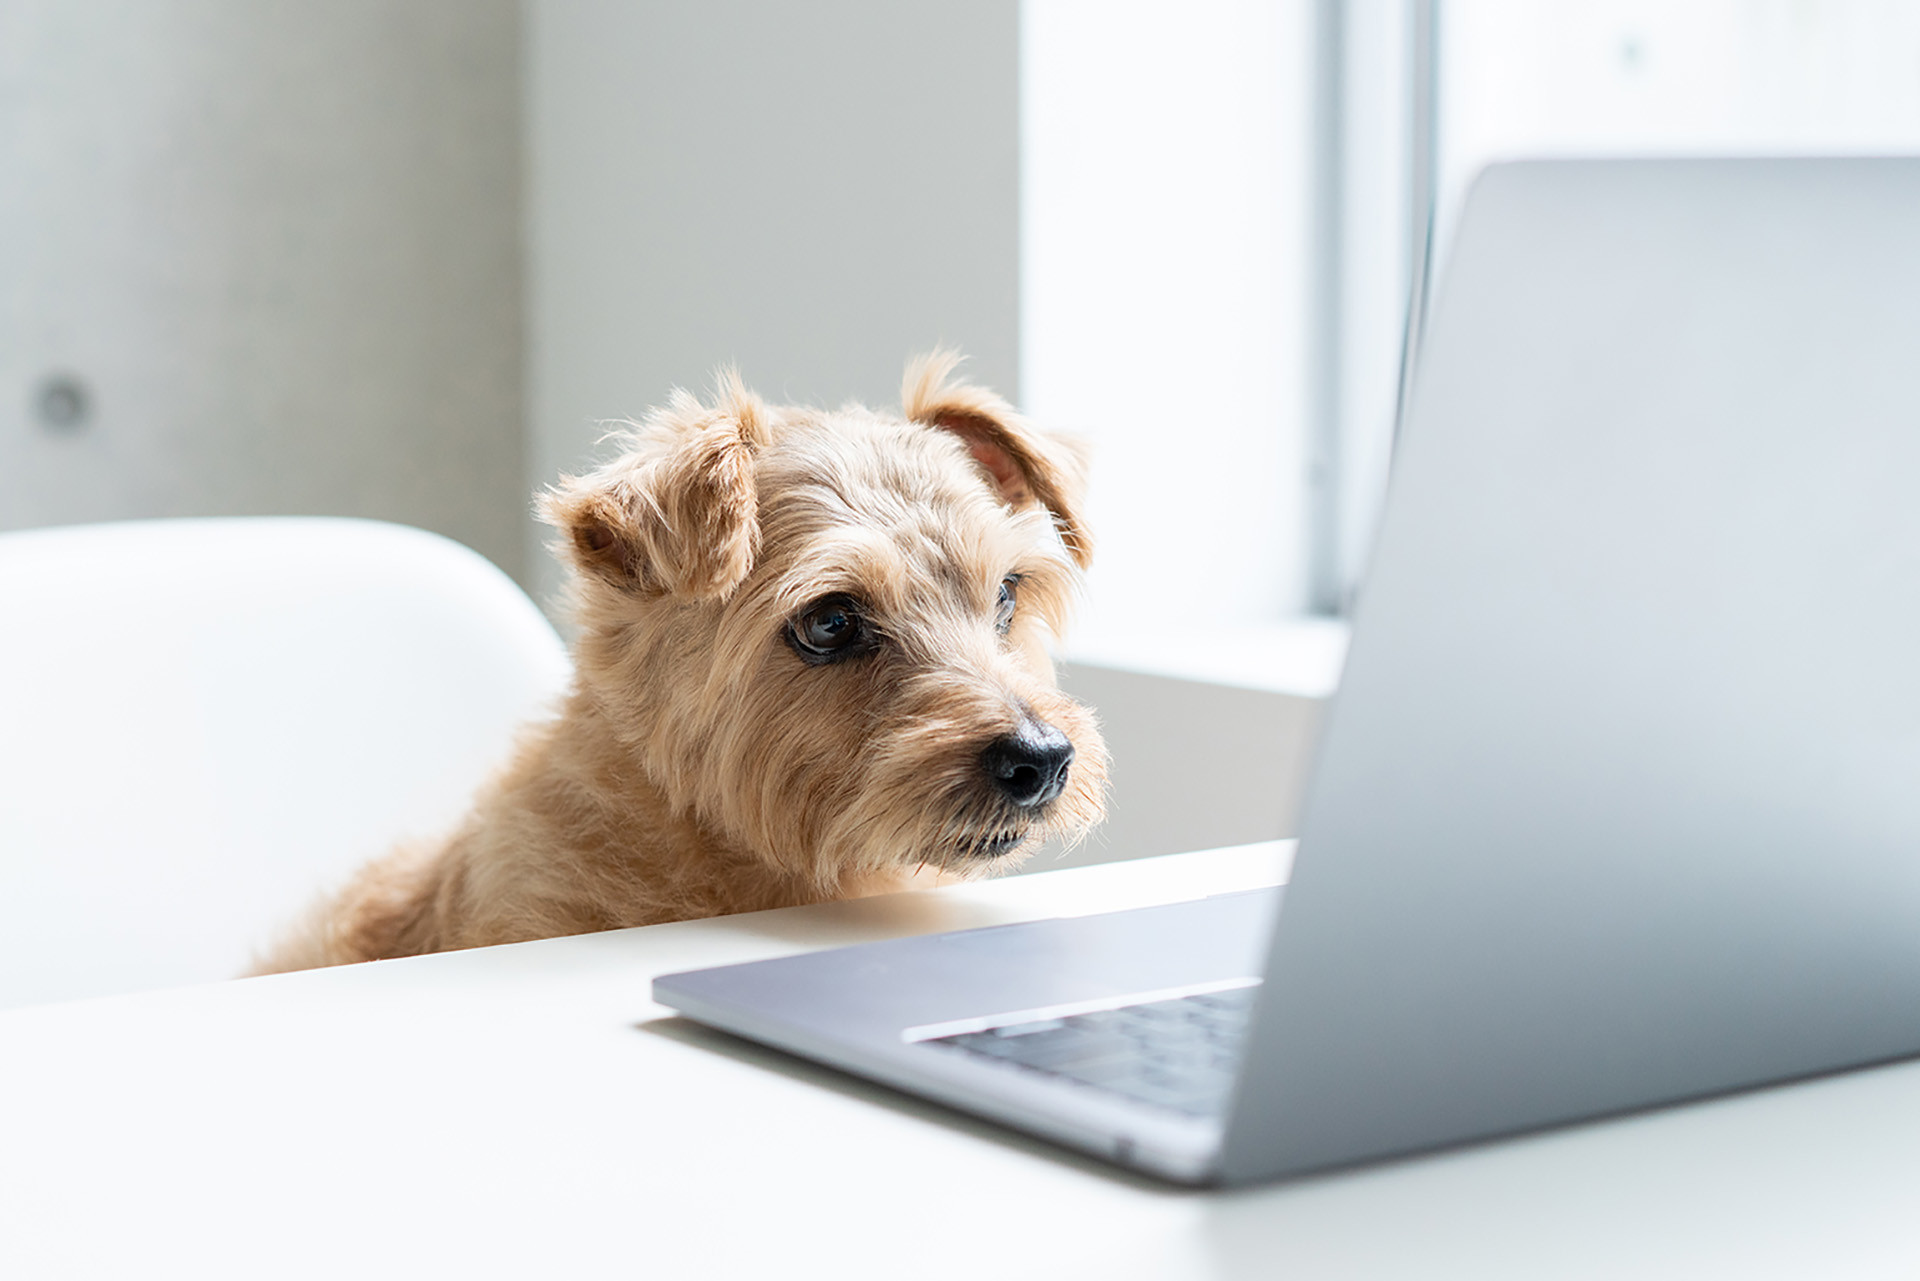 Dog searching on laptop for doggy day care options